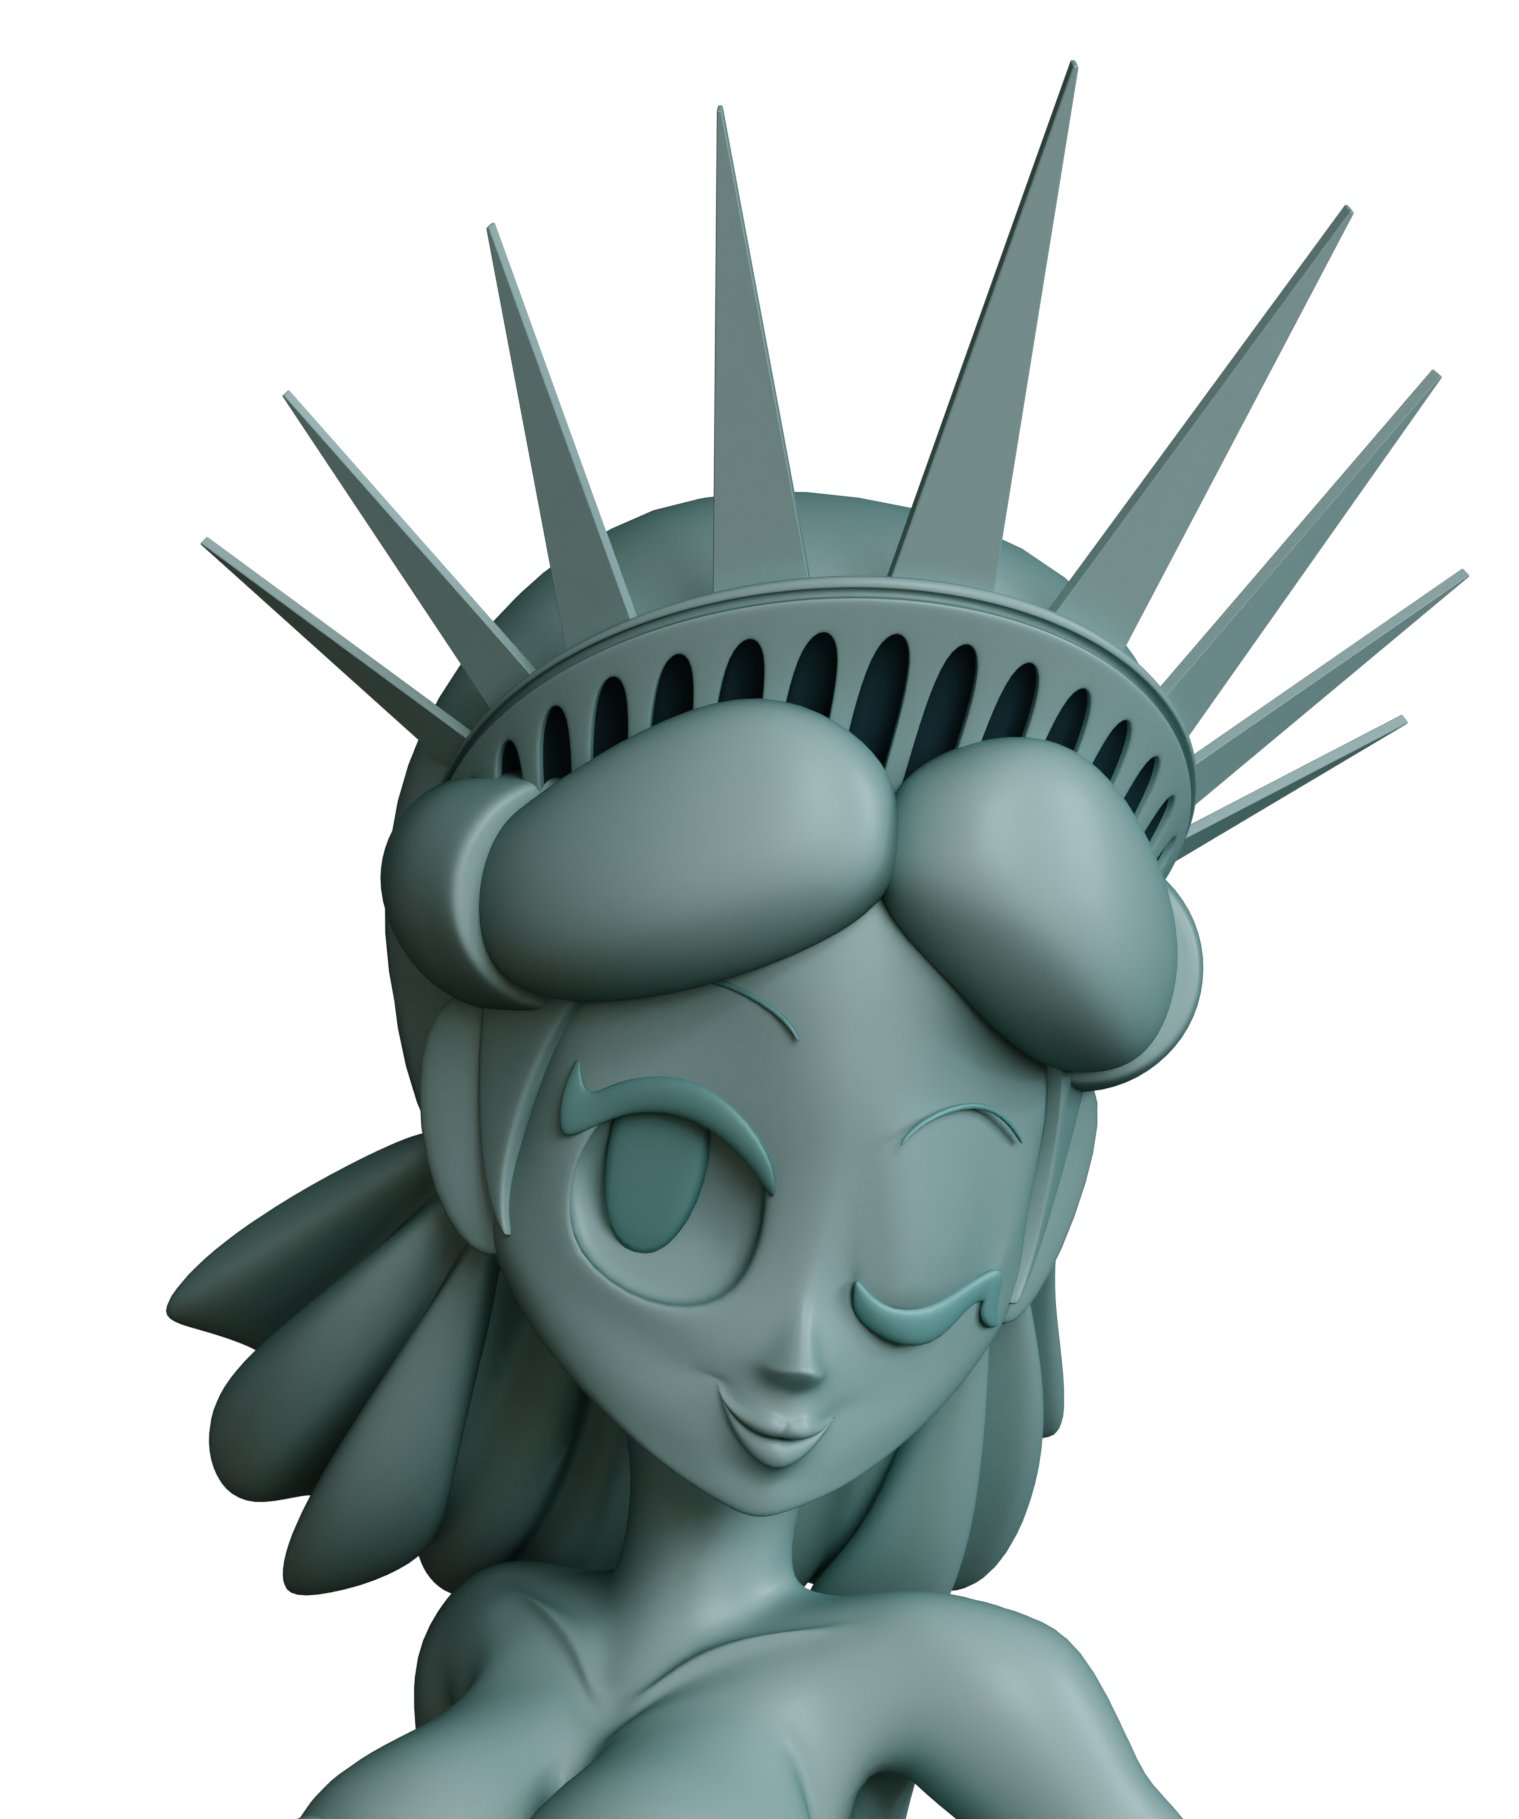 CosmicTrance on X: It's still July, right? Anyhow here's a teaseWIP of my Statue  of Liberty model based off the wonderful animations done by @tortoisesensei  I'll get the model done sometime in